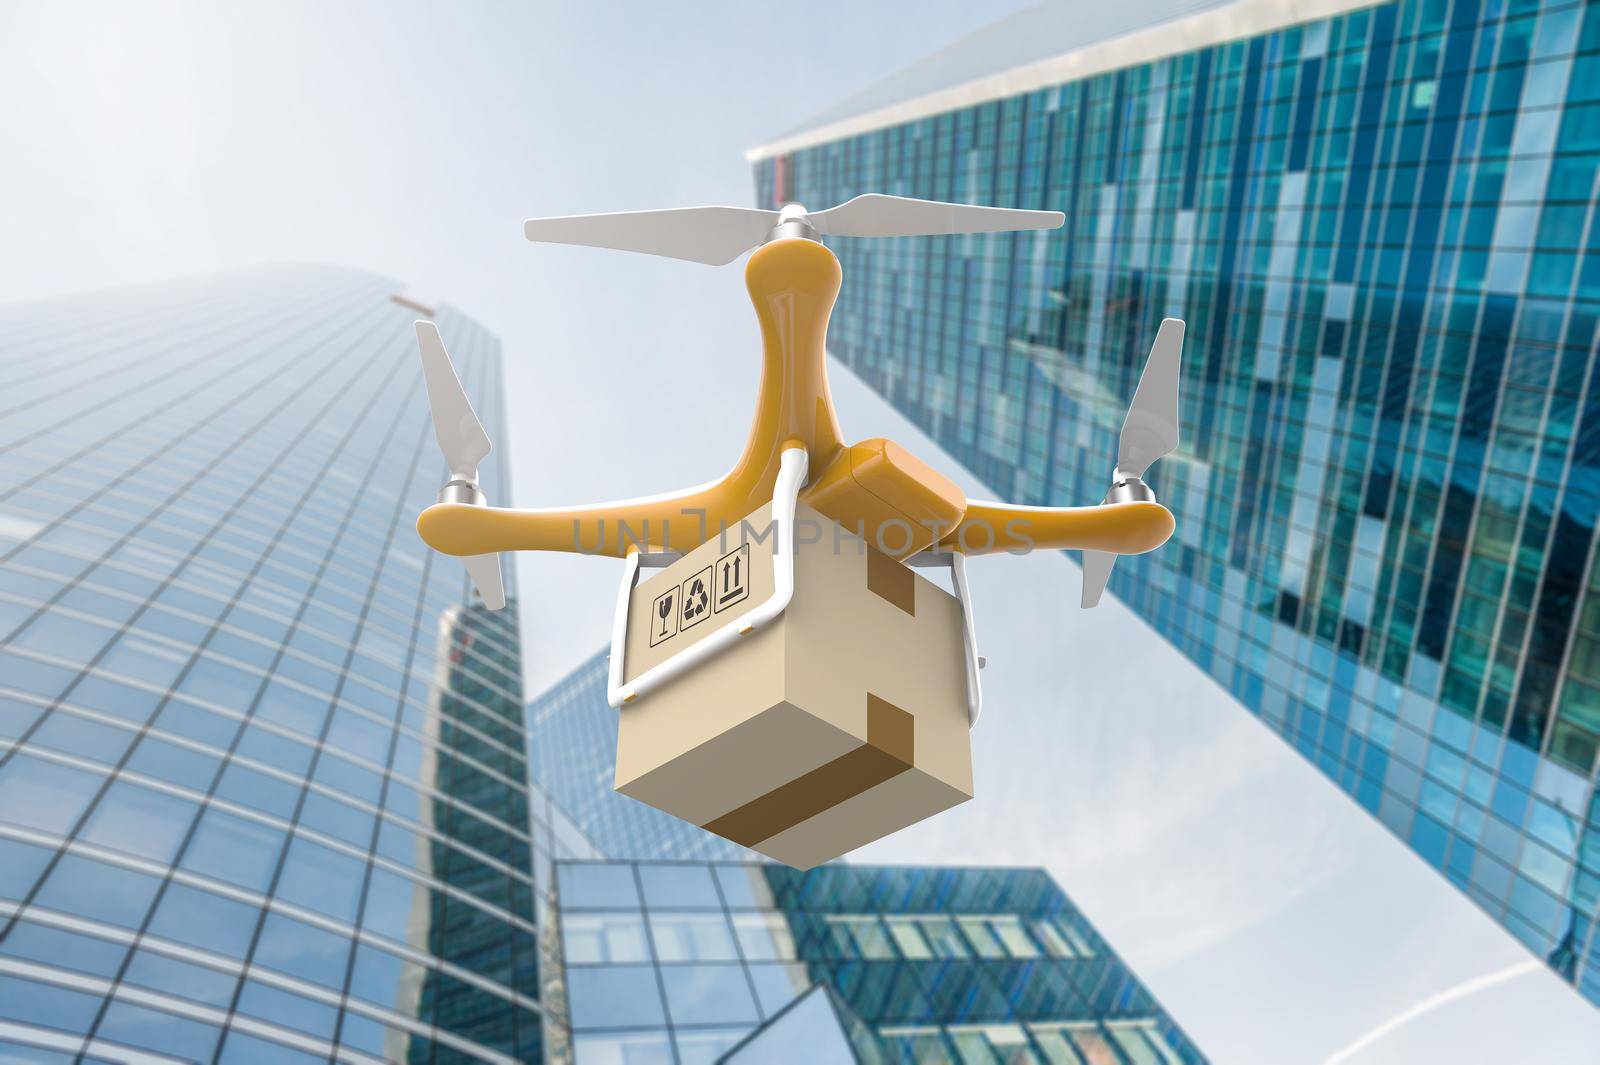 Drone flying with a delivery box package in a city by cla78